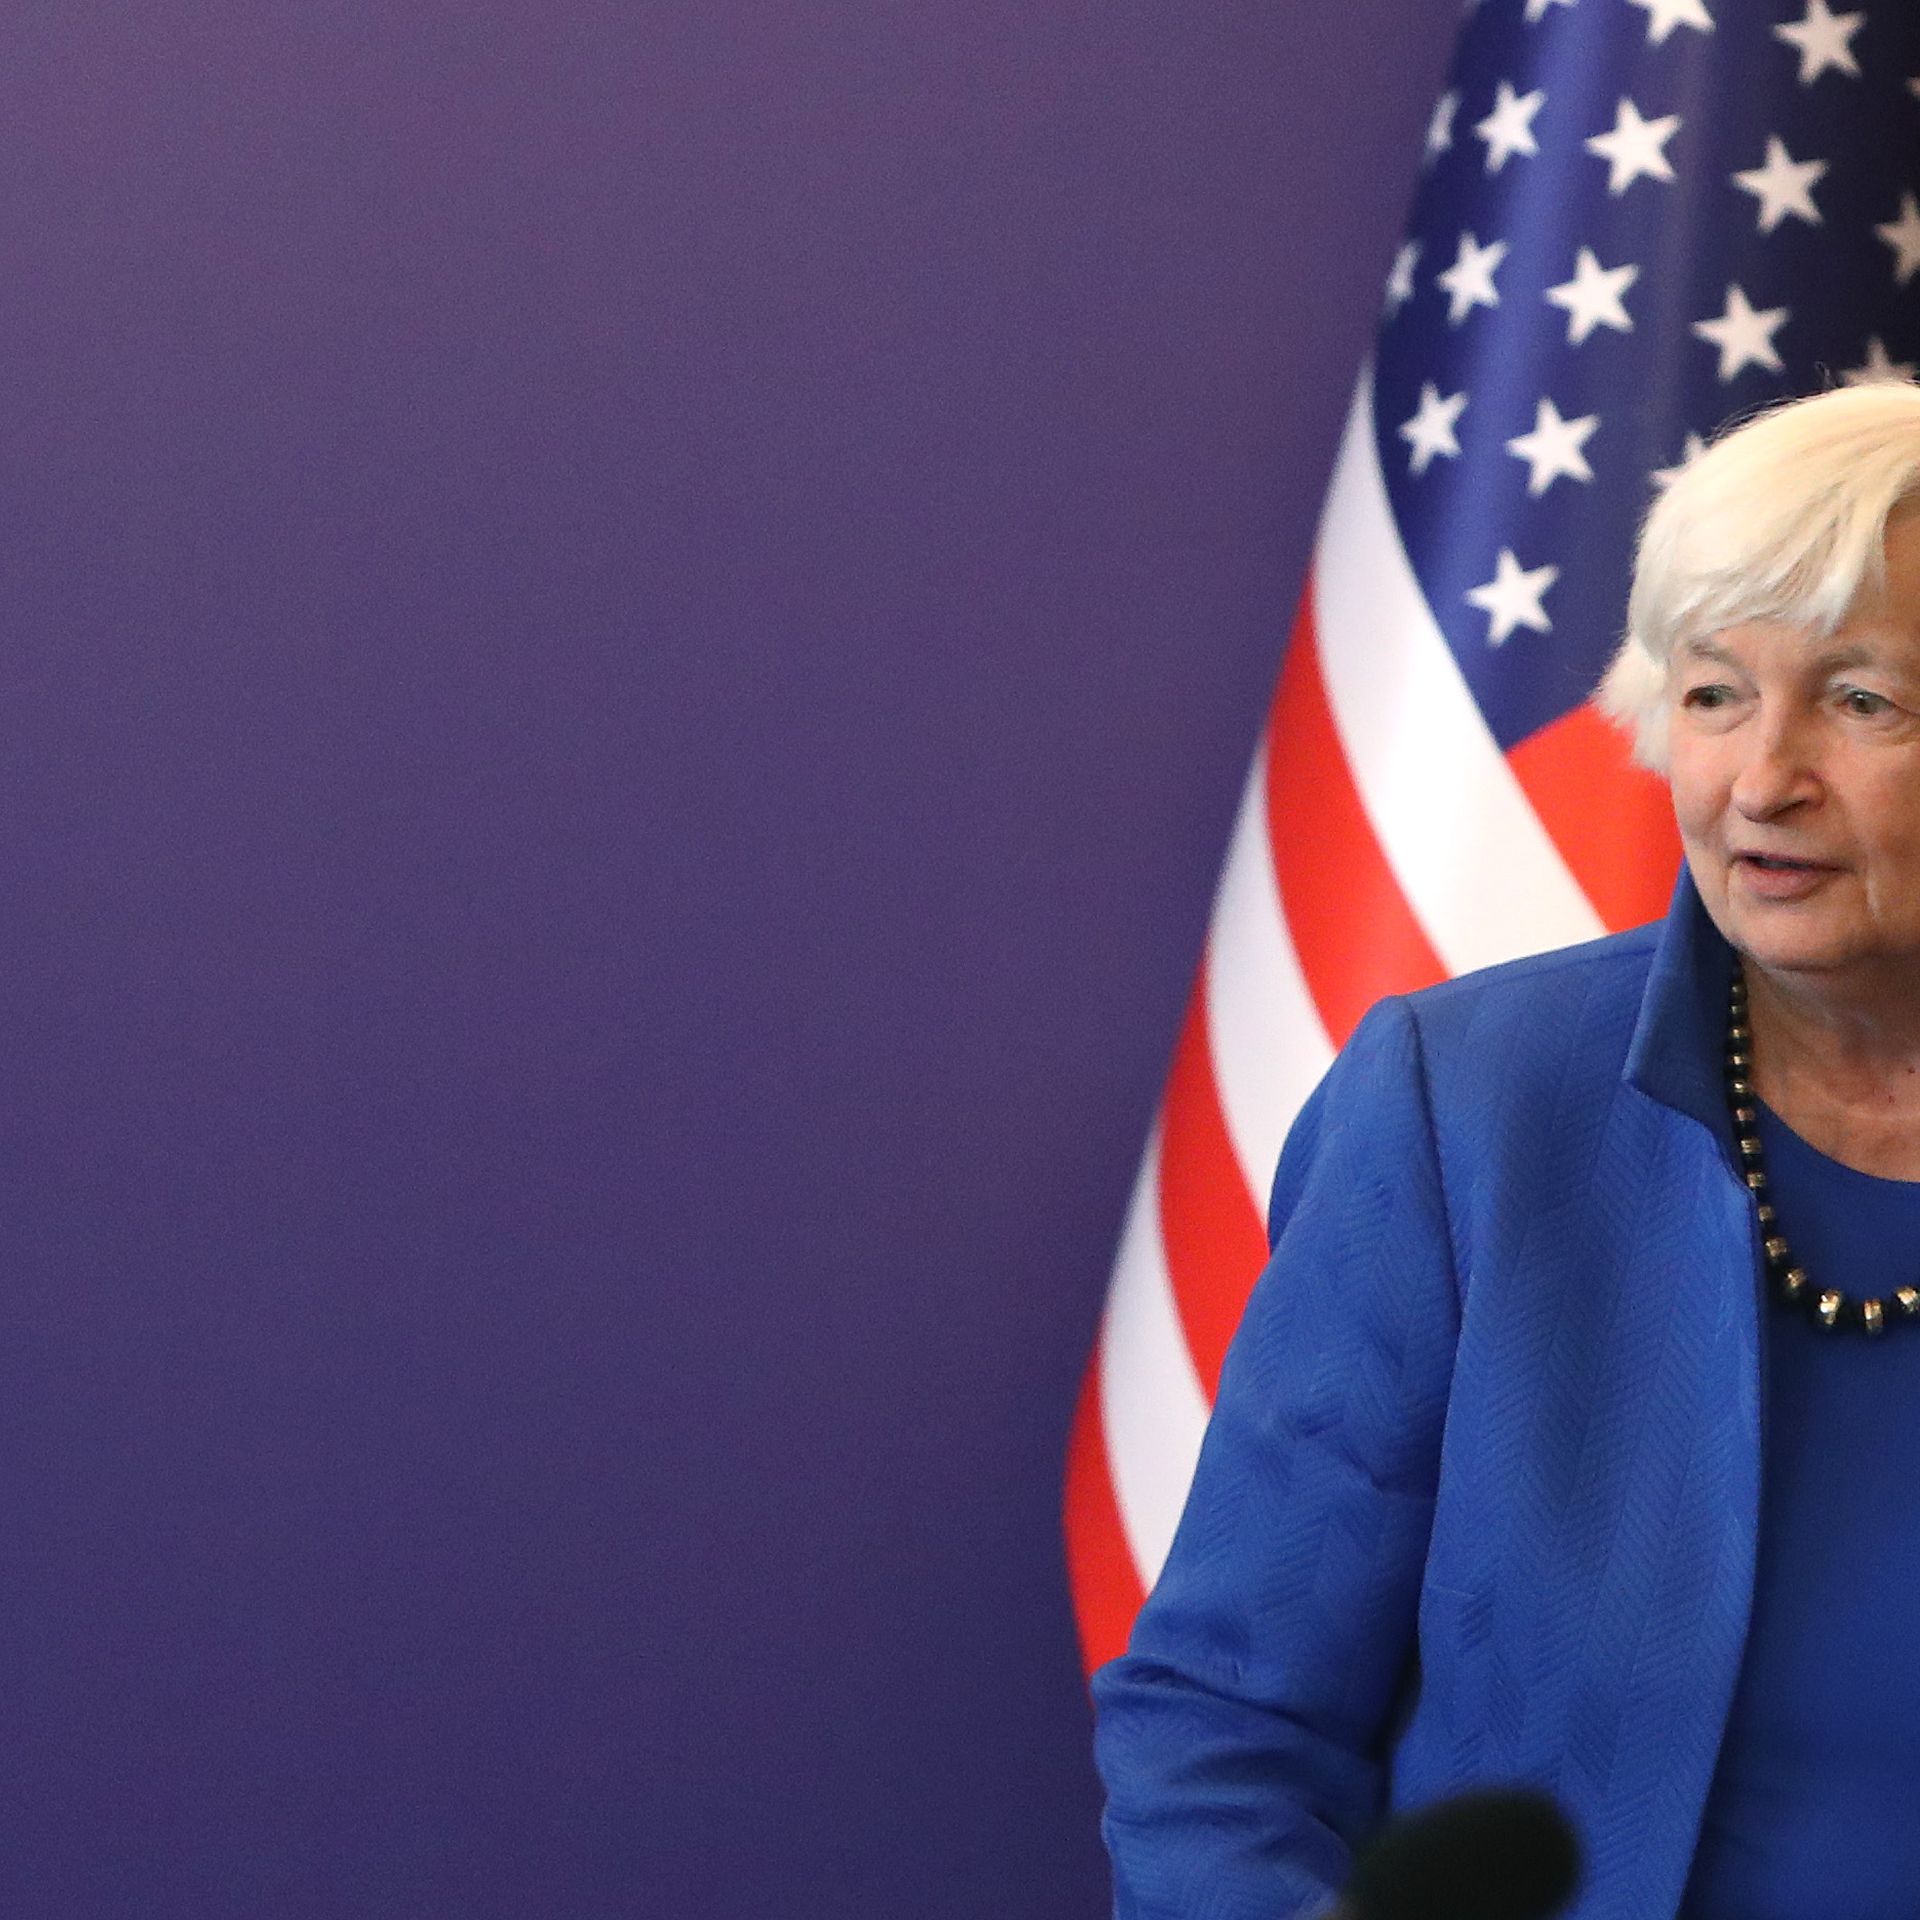 Janet Yellen standing next to an American flag